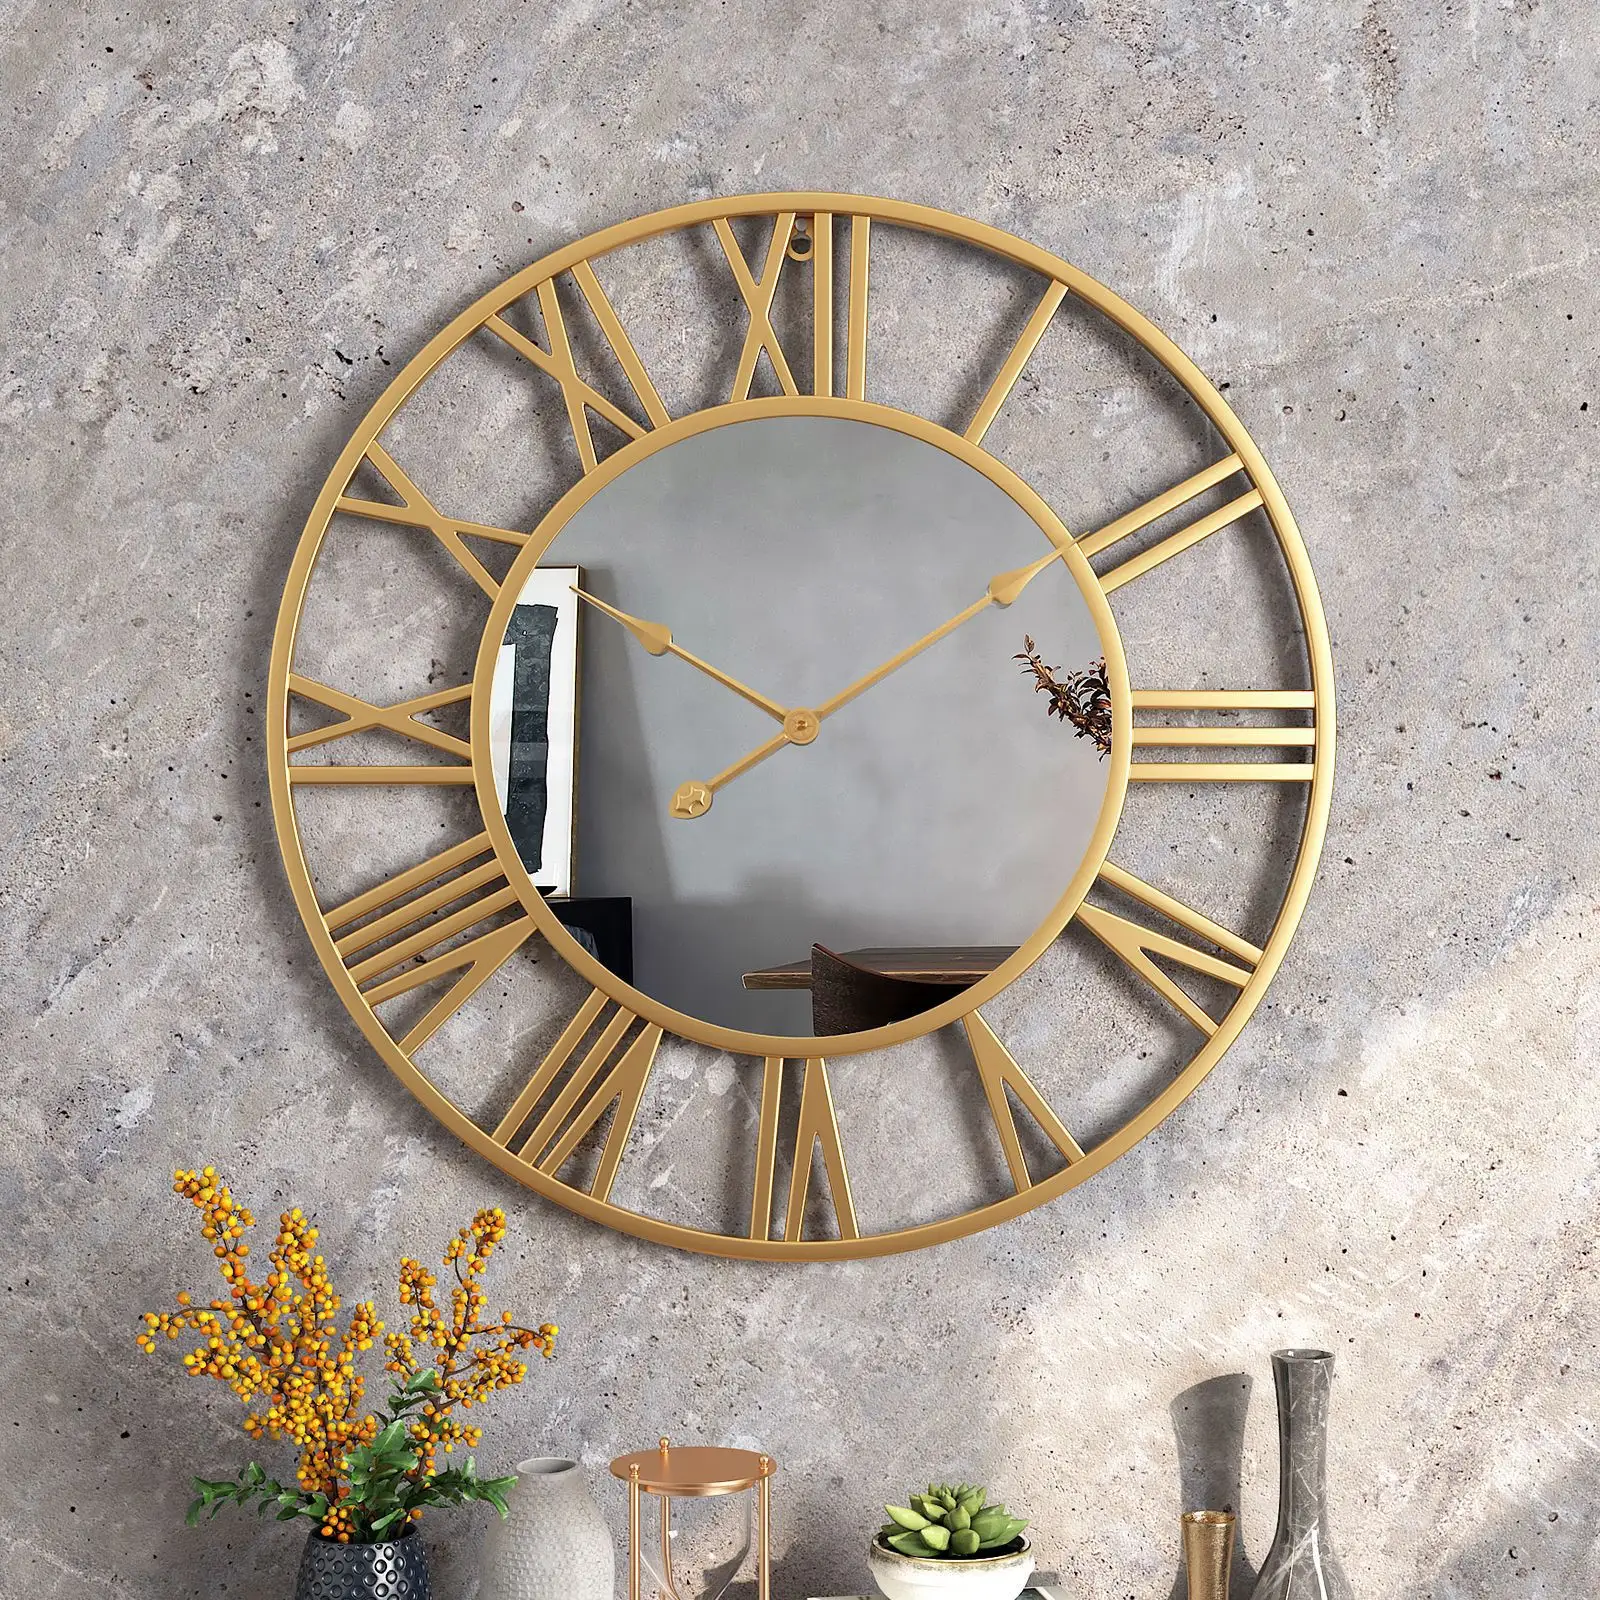 Modern 3D Large Wall Clock Roman Numerals Retro Round Metal Iron Accurate Silent Nordic Hanging Ornament Living Room Decor Clock